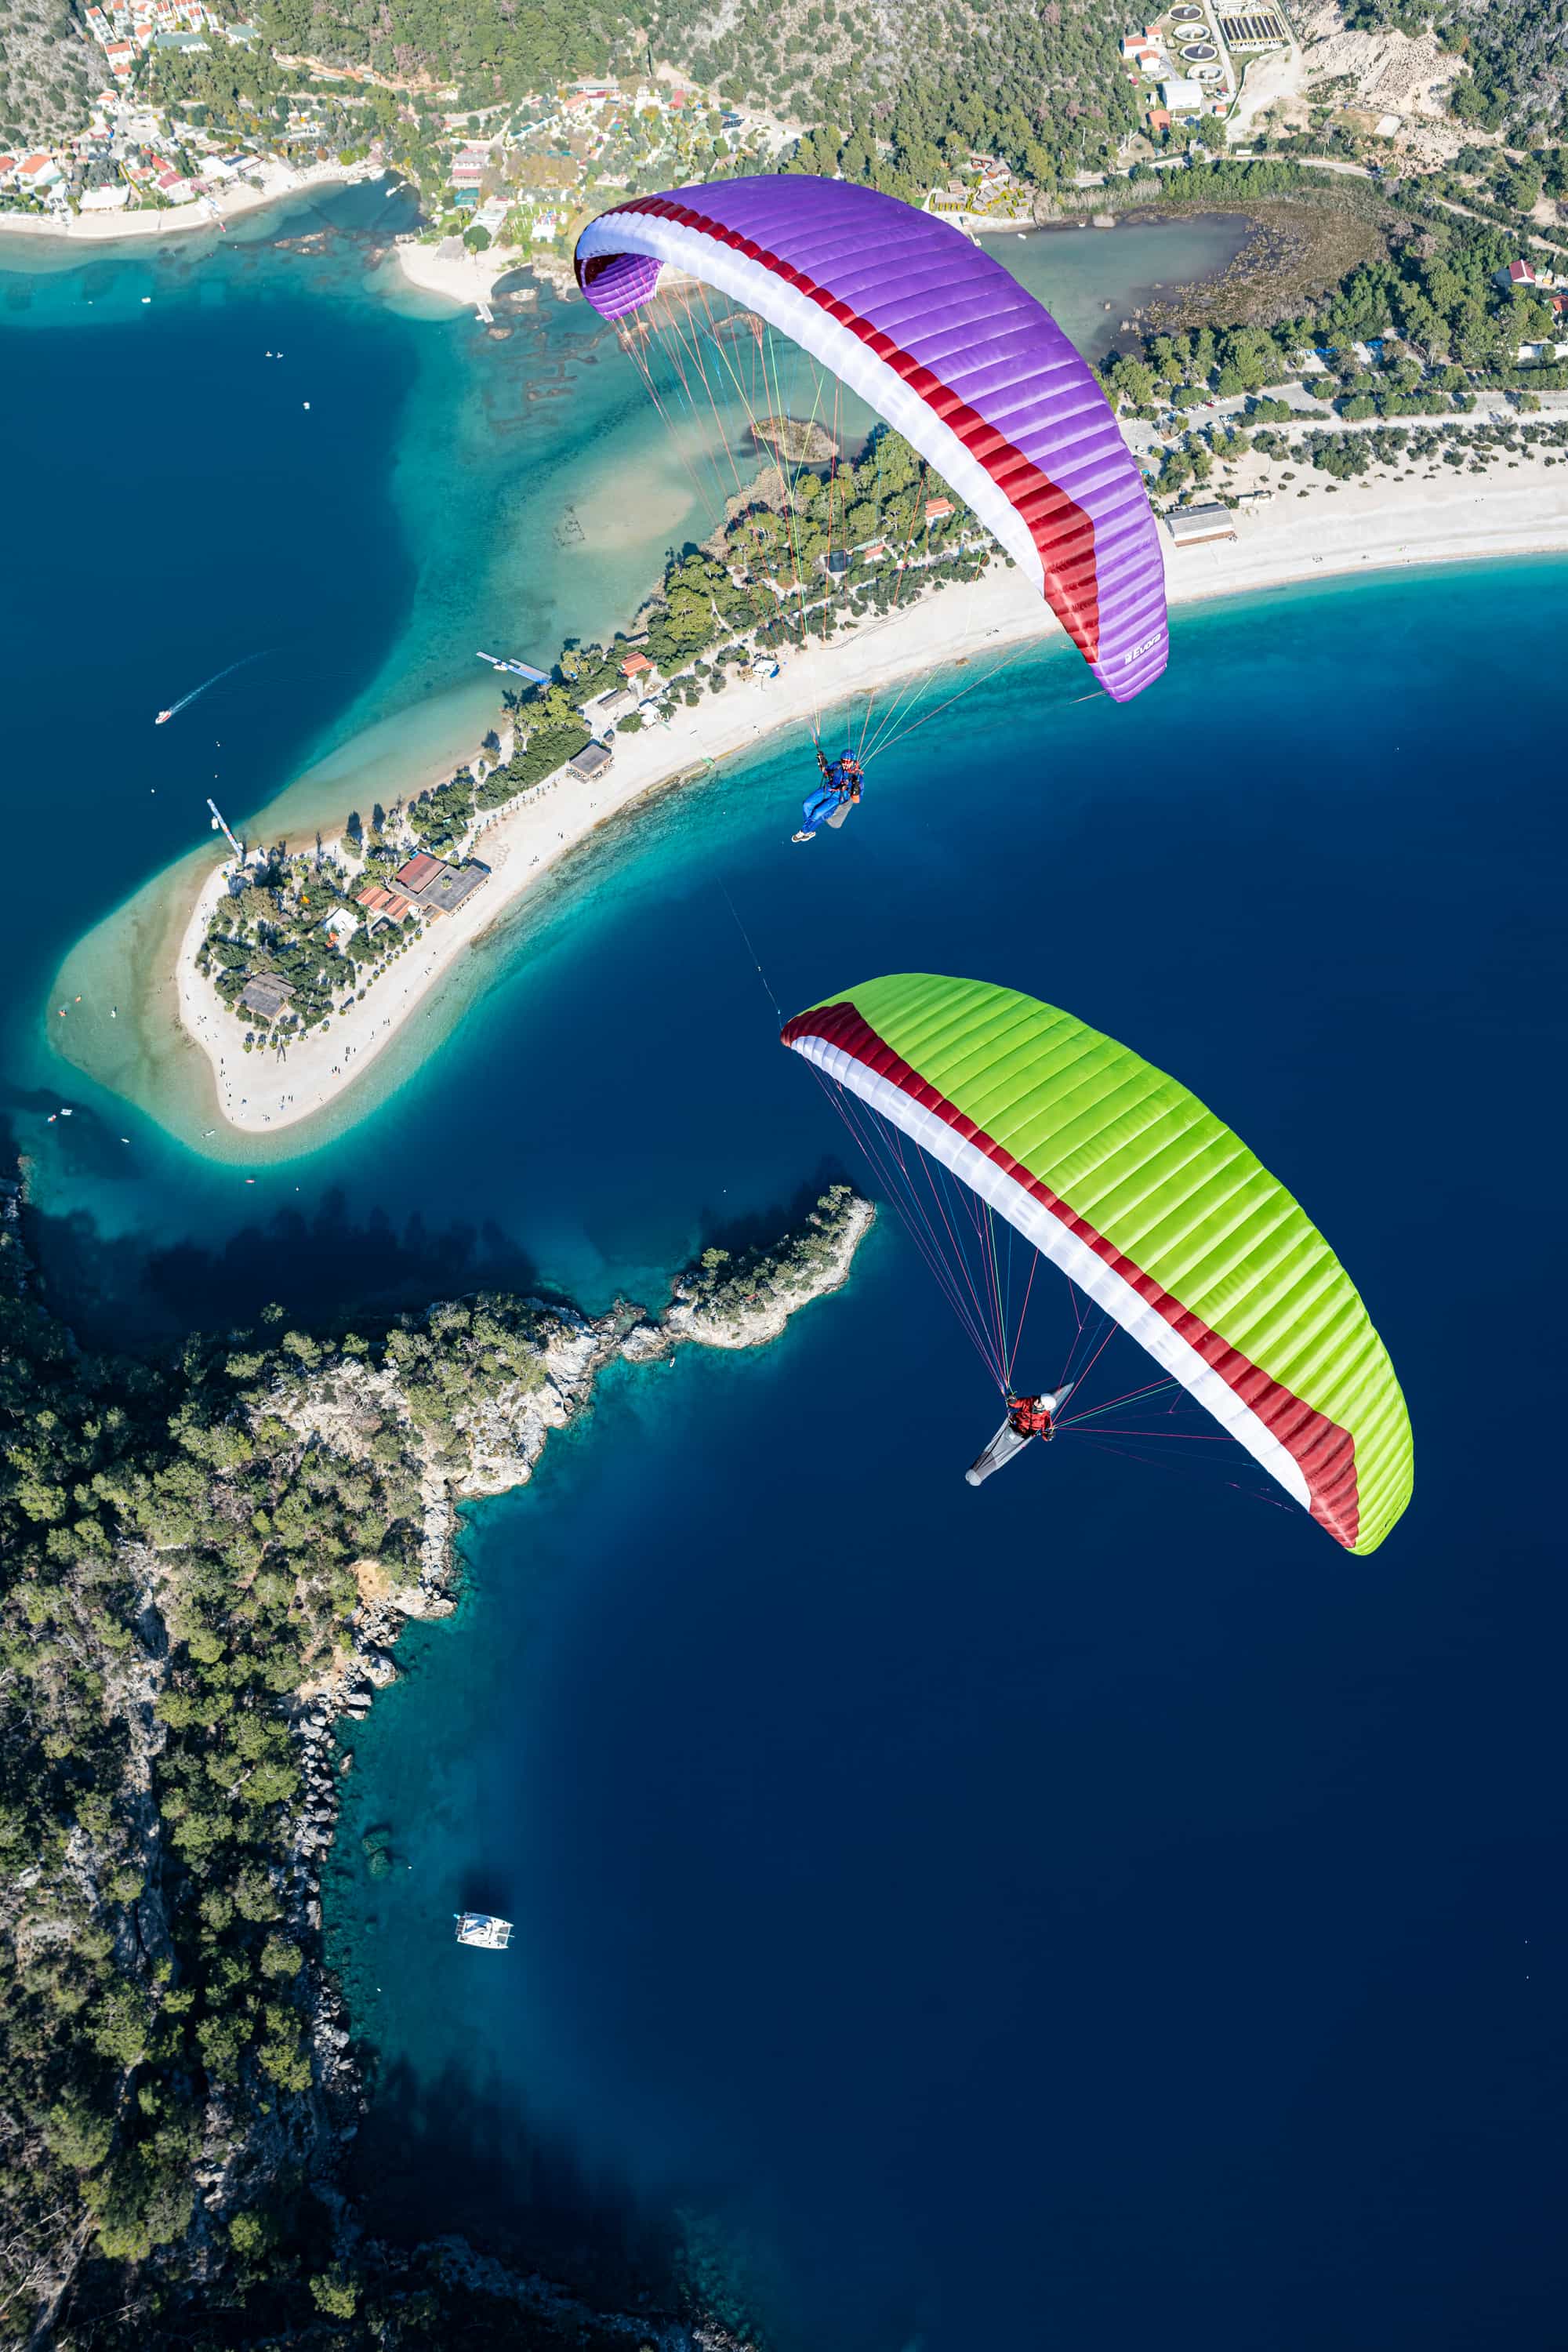 Fly High with FlySpain: Why They're the Best Choice for Paragliding Training